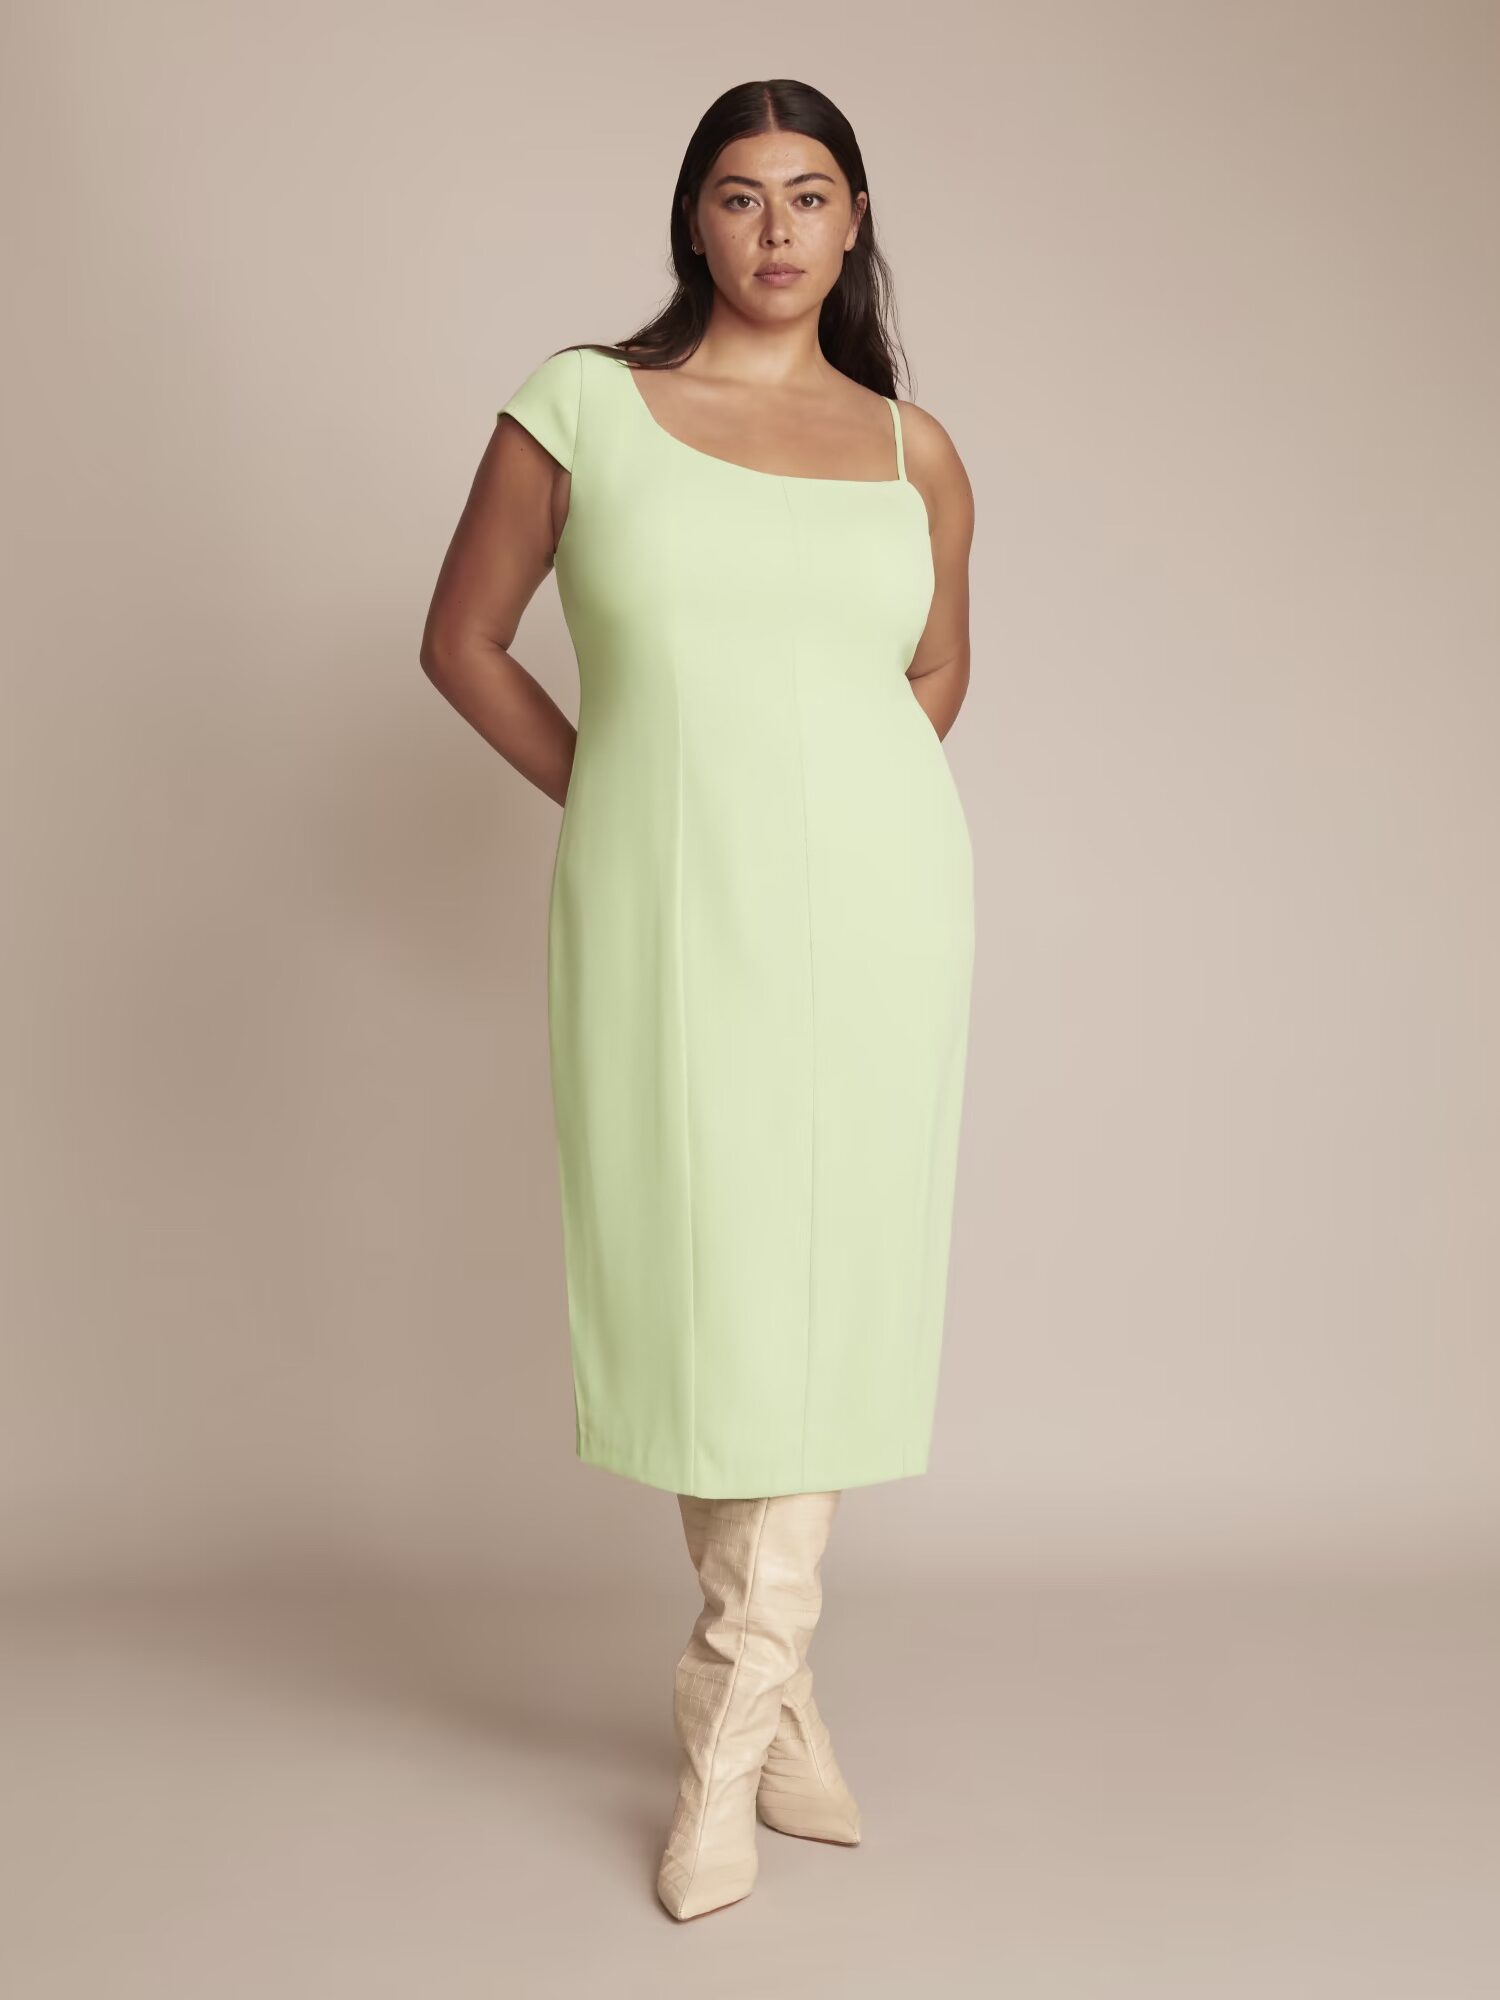 A woman with long dark hair wears a light green dress and beige knee-high boots, posing against a neutral background.